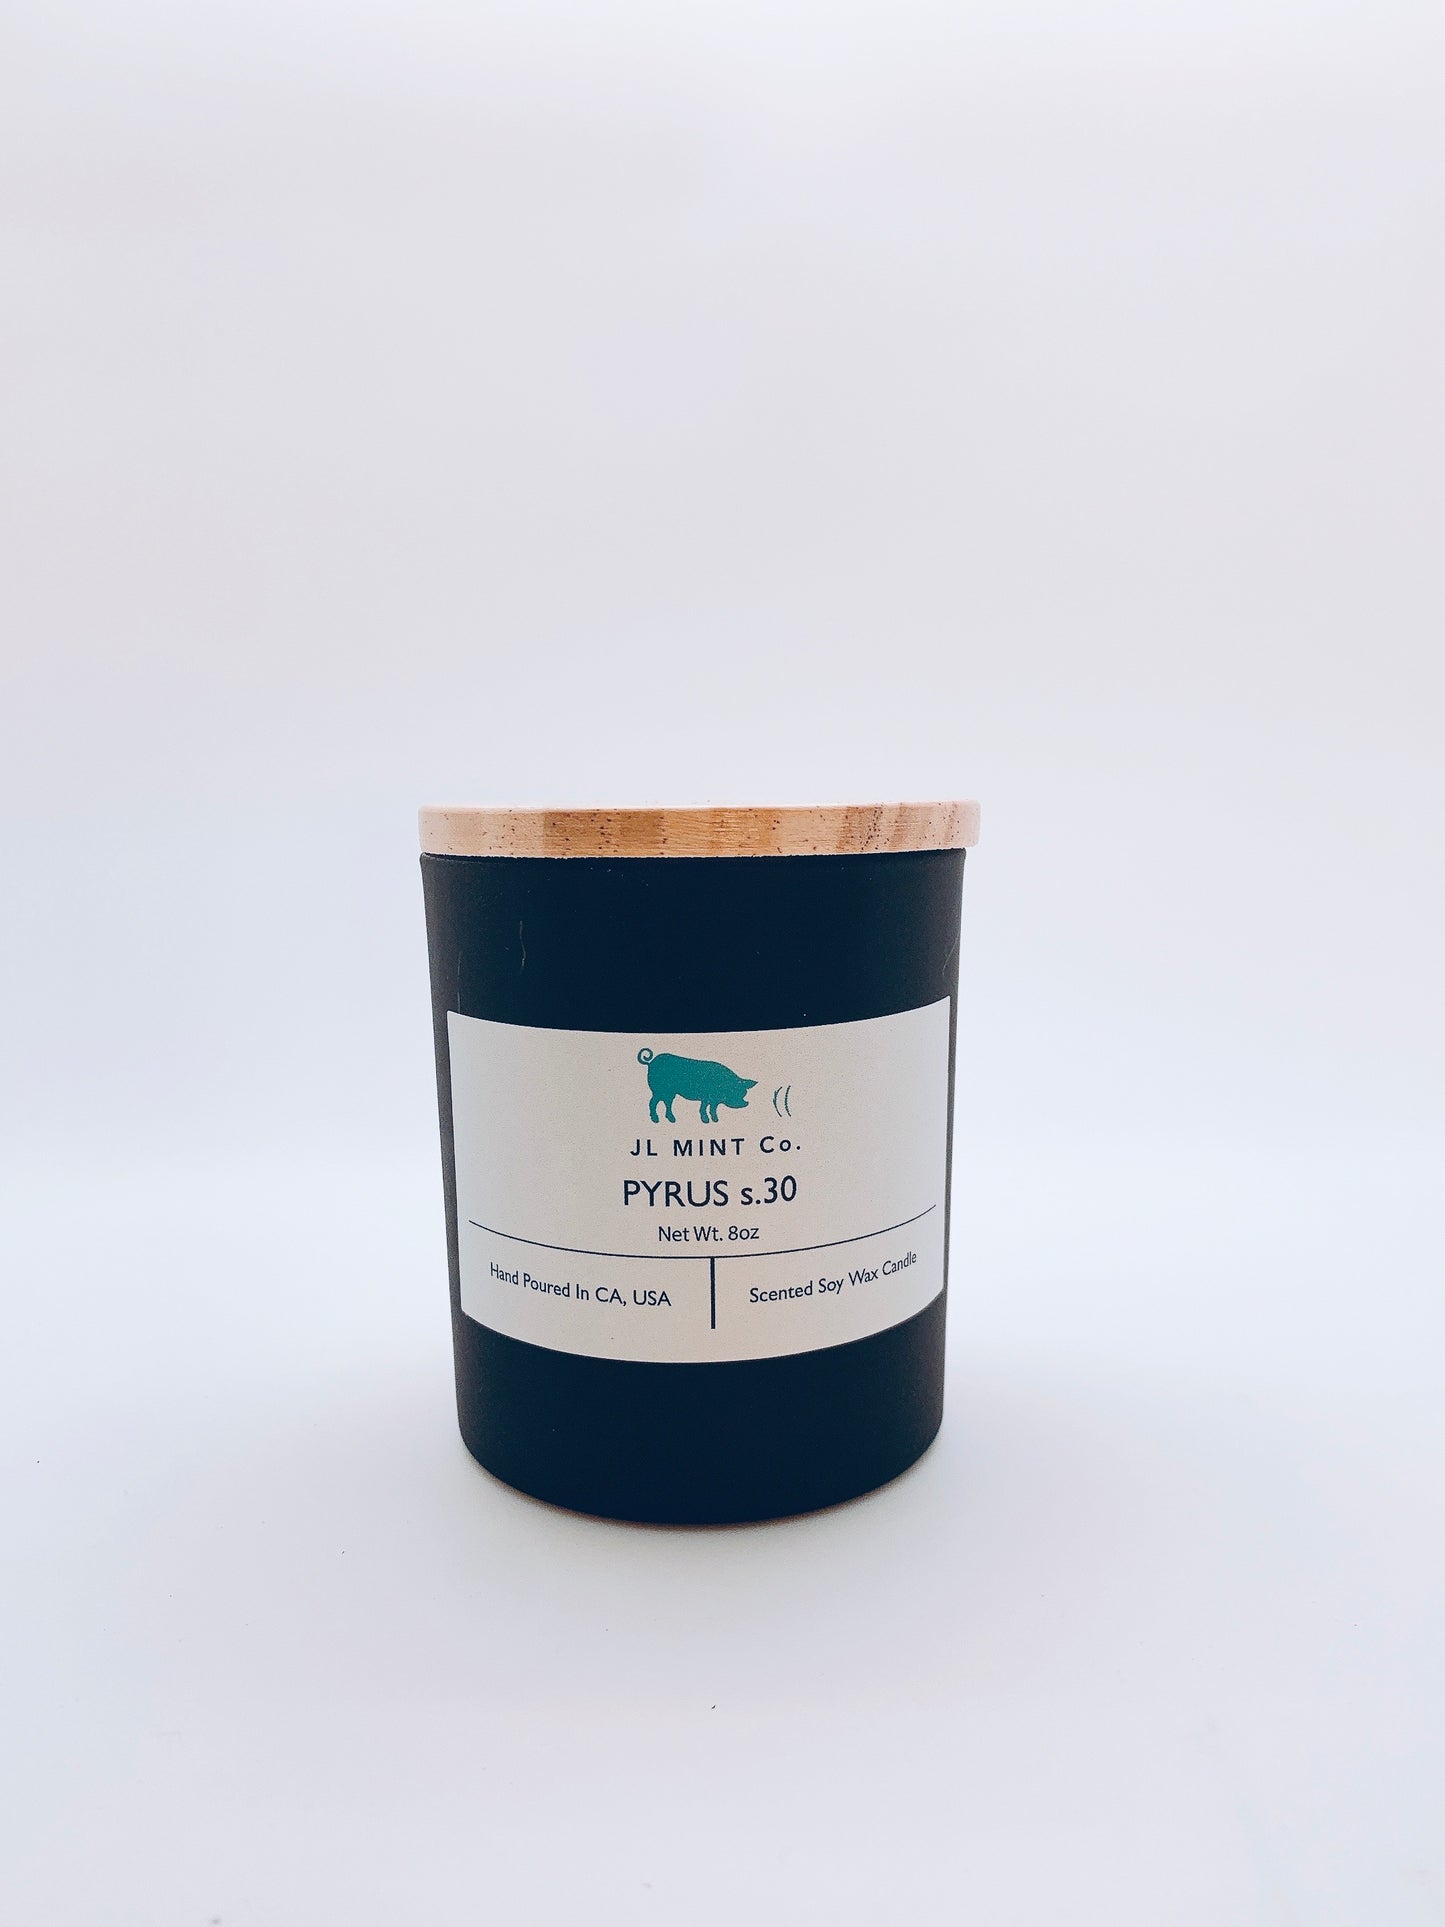 PYRUS s.30 JL Mint Co. Soy Wax Candle